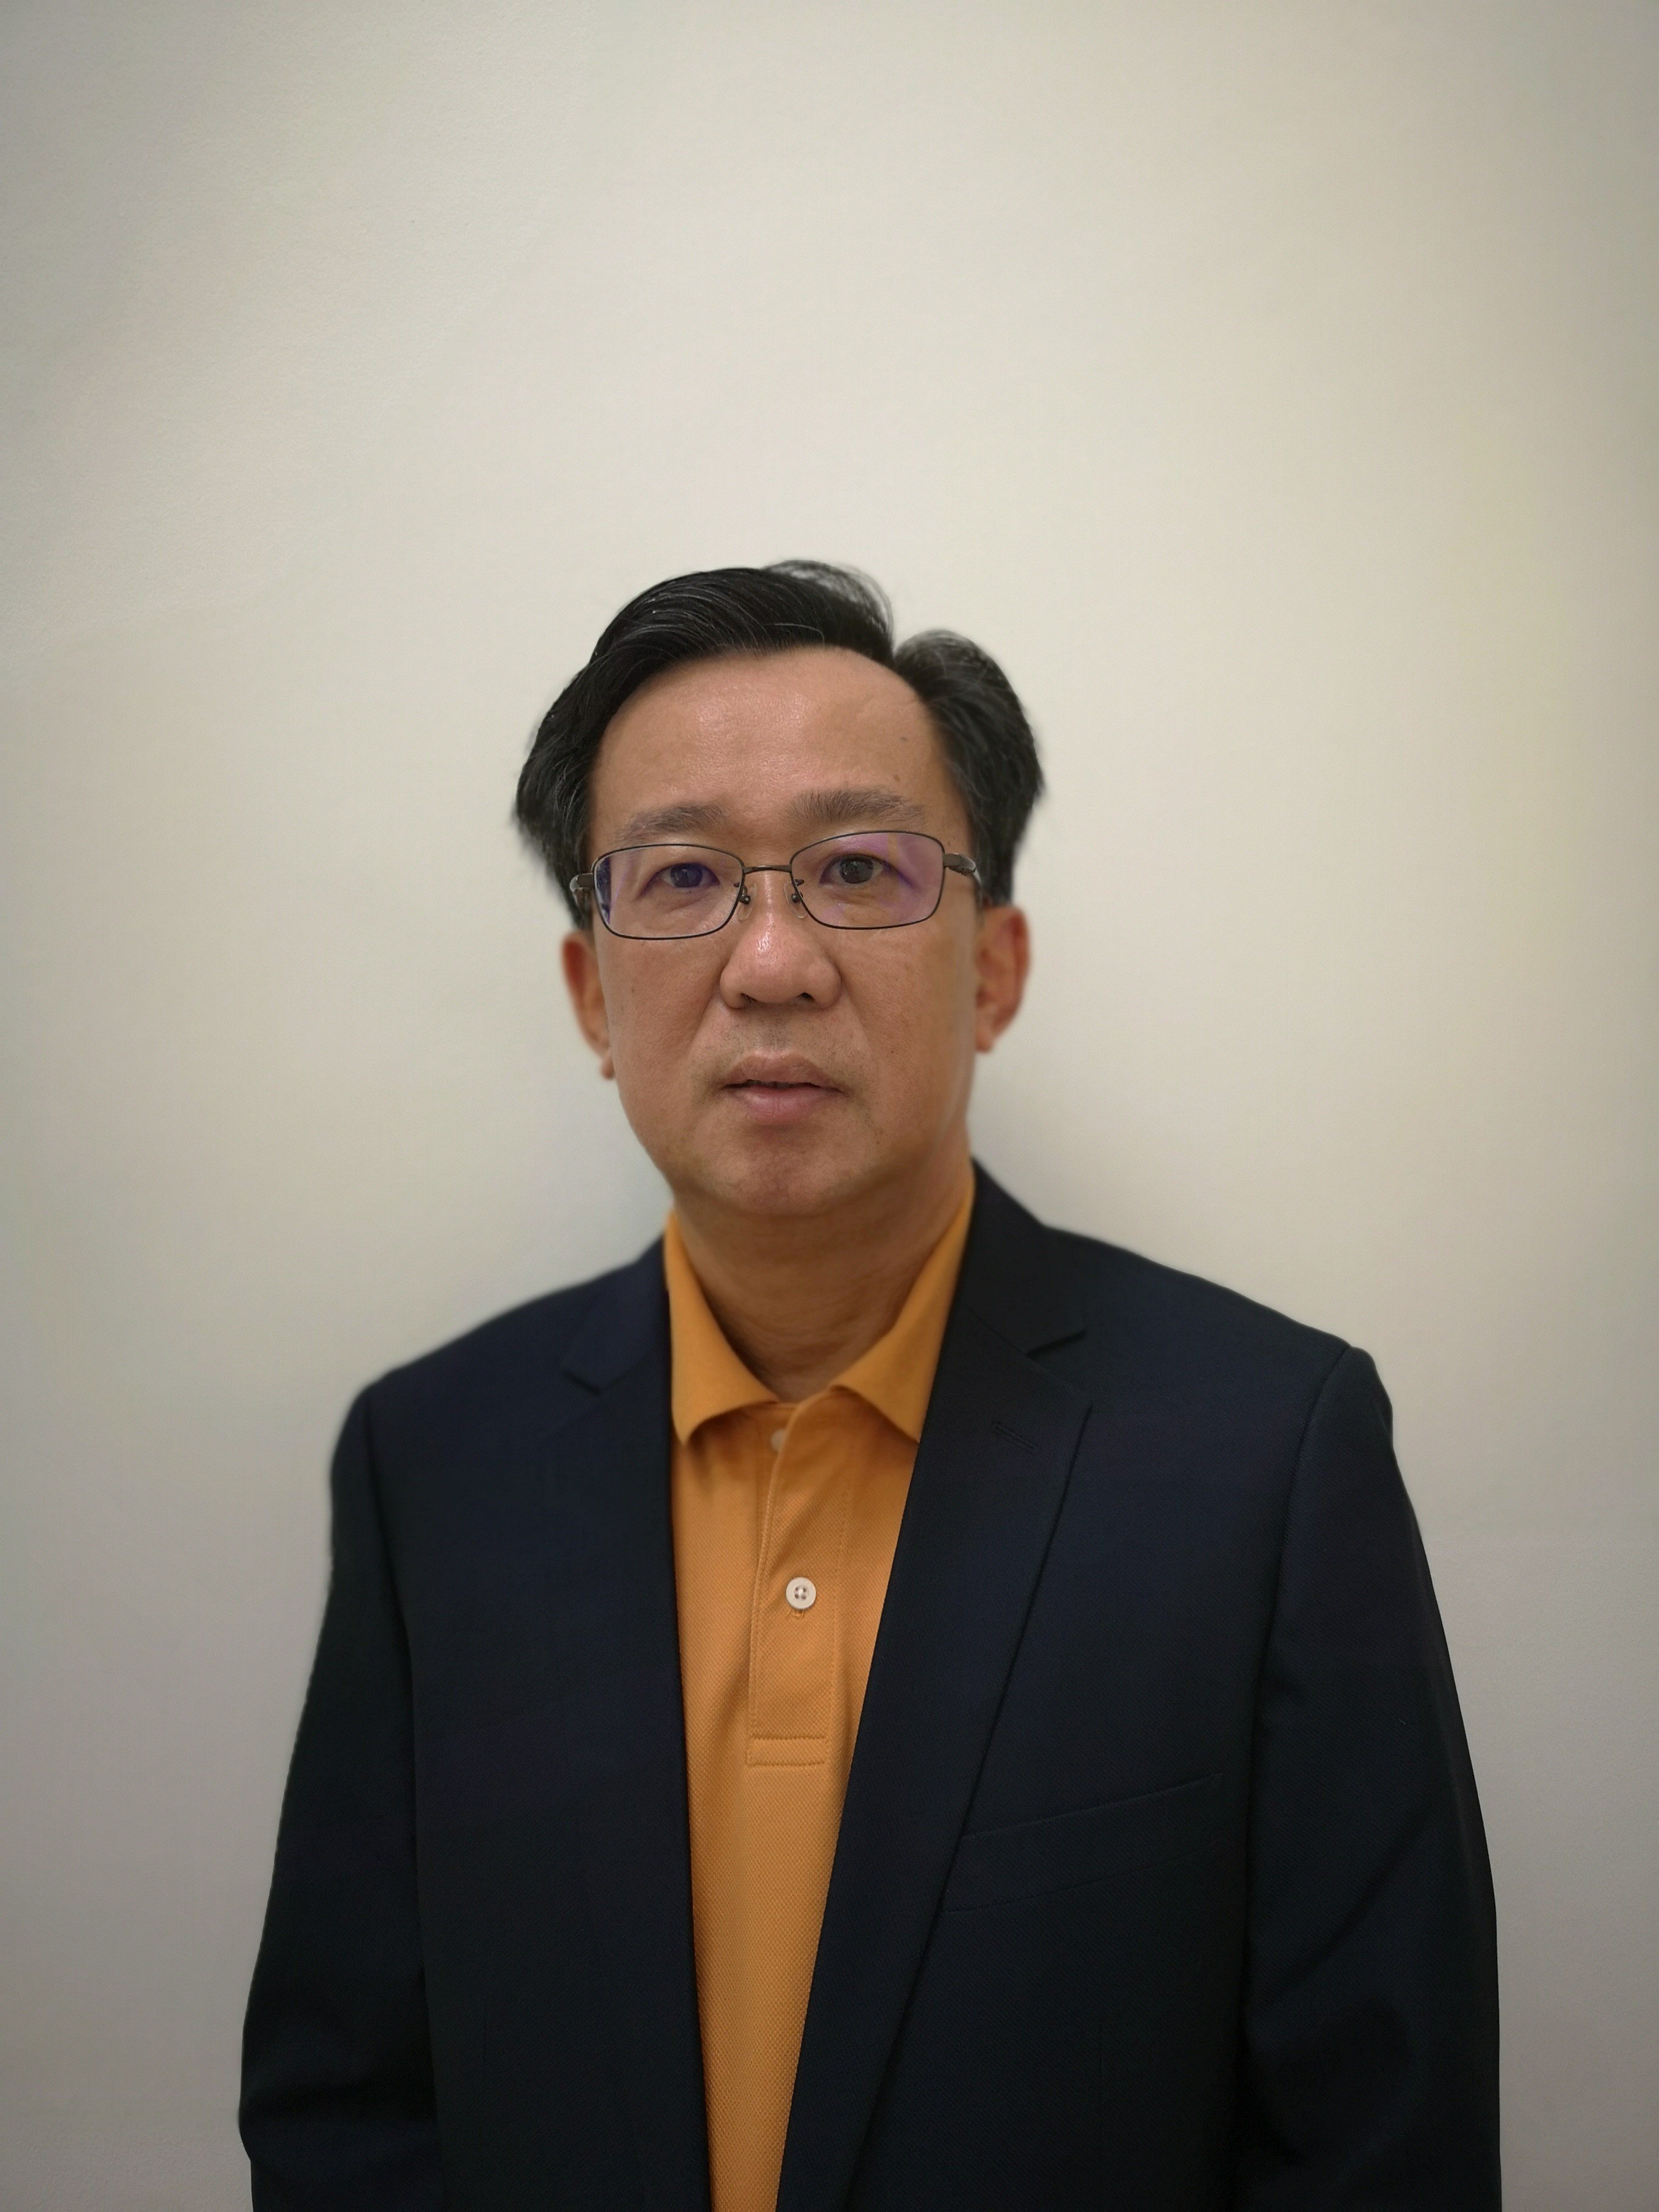 William Lim, founder and general manager